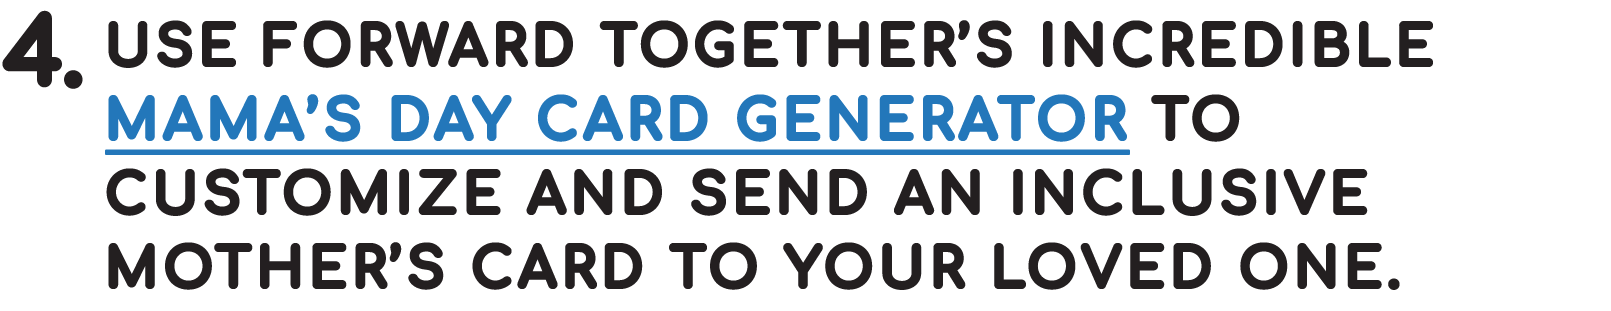 Use Forward Together’s incredible
Mama’s Day card generator to customize and send an inclusive Mother’s card to your loved one.